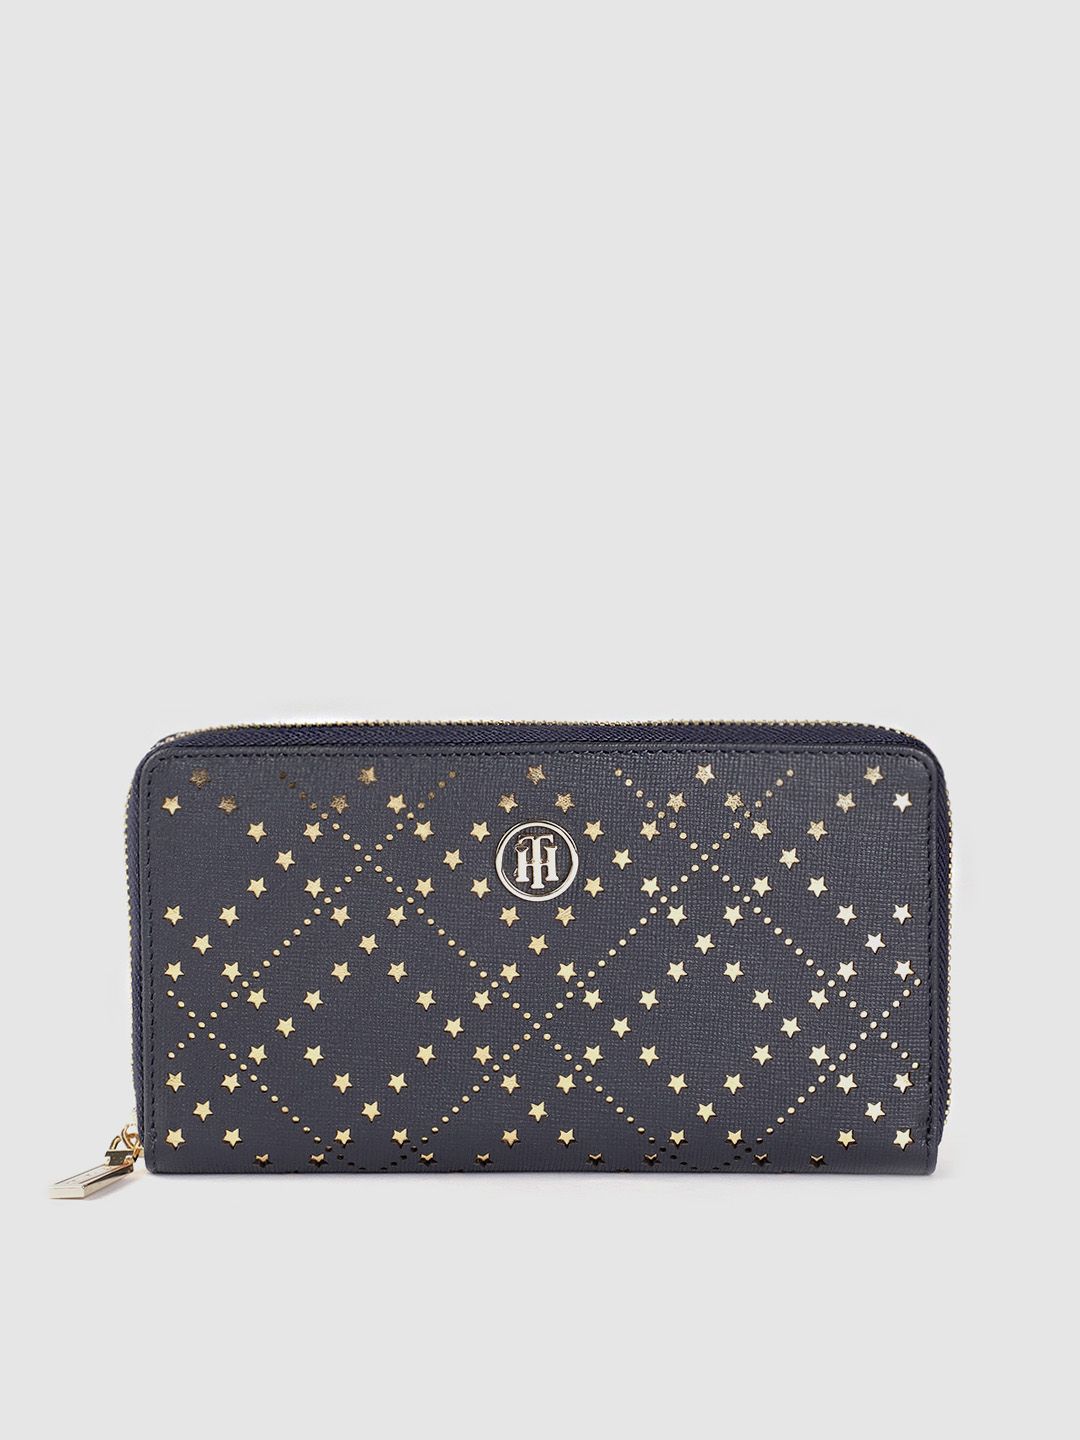 Tommy Hilfiger Women Navy Blue & Gold-Toned Laser Cuts Leather Zip Around Wallet Price in India